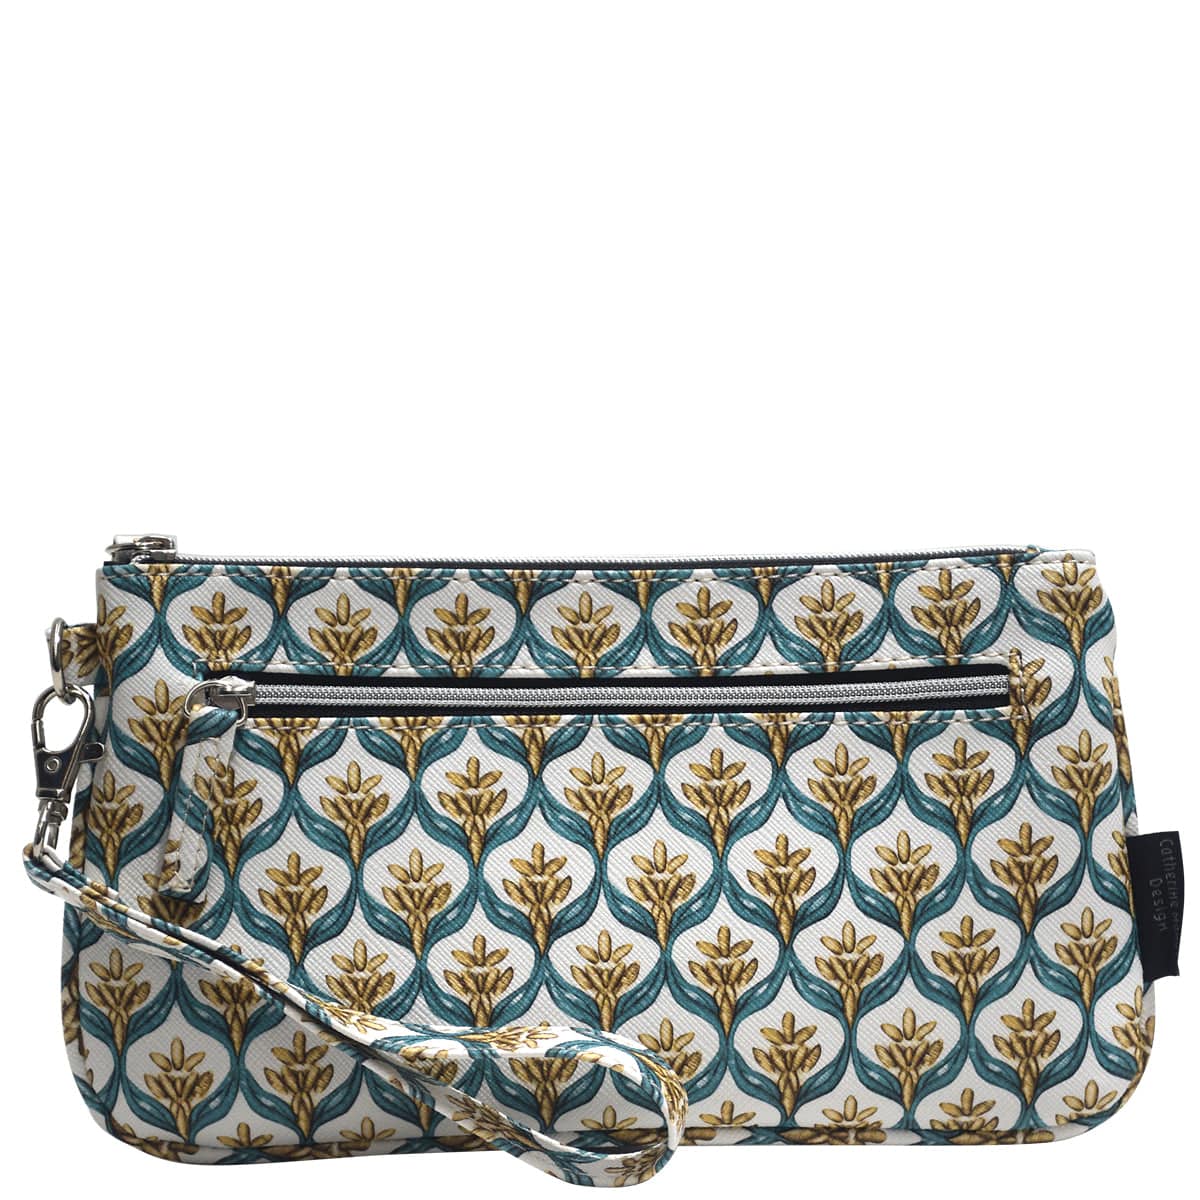 Clutch Wallet - French Chateau Blue Sand